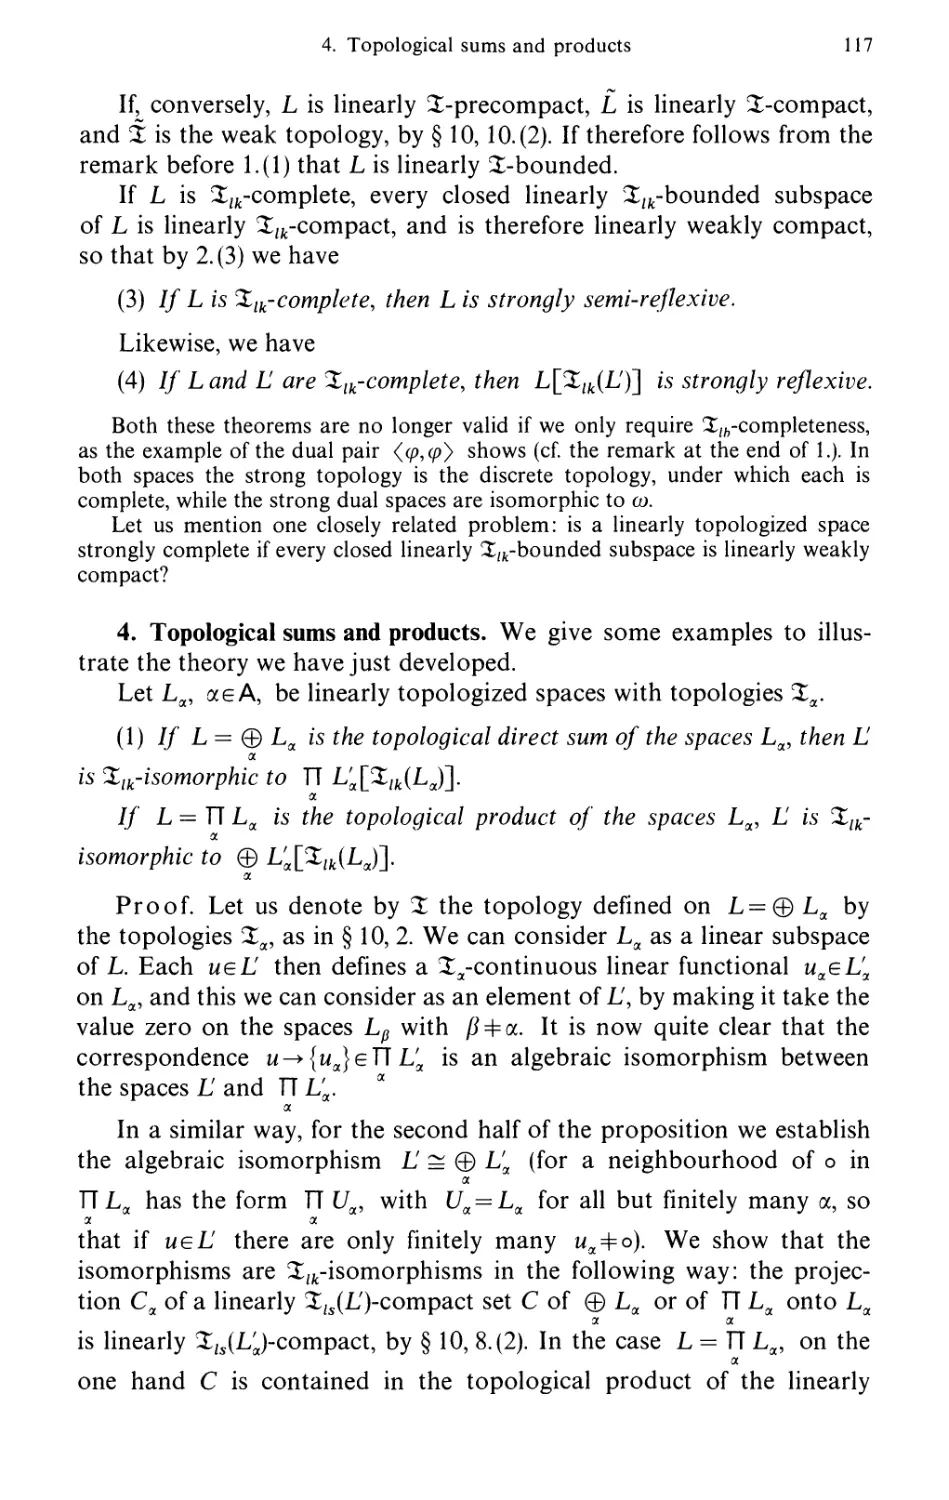 4. Topological sums and products